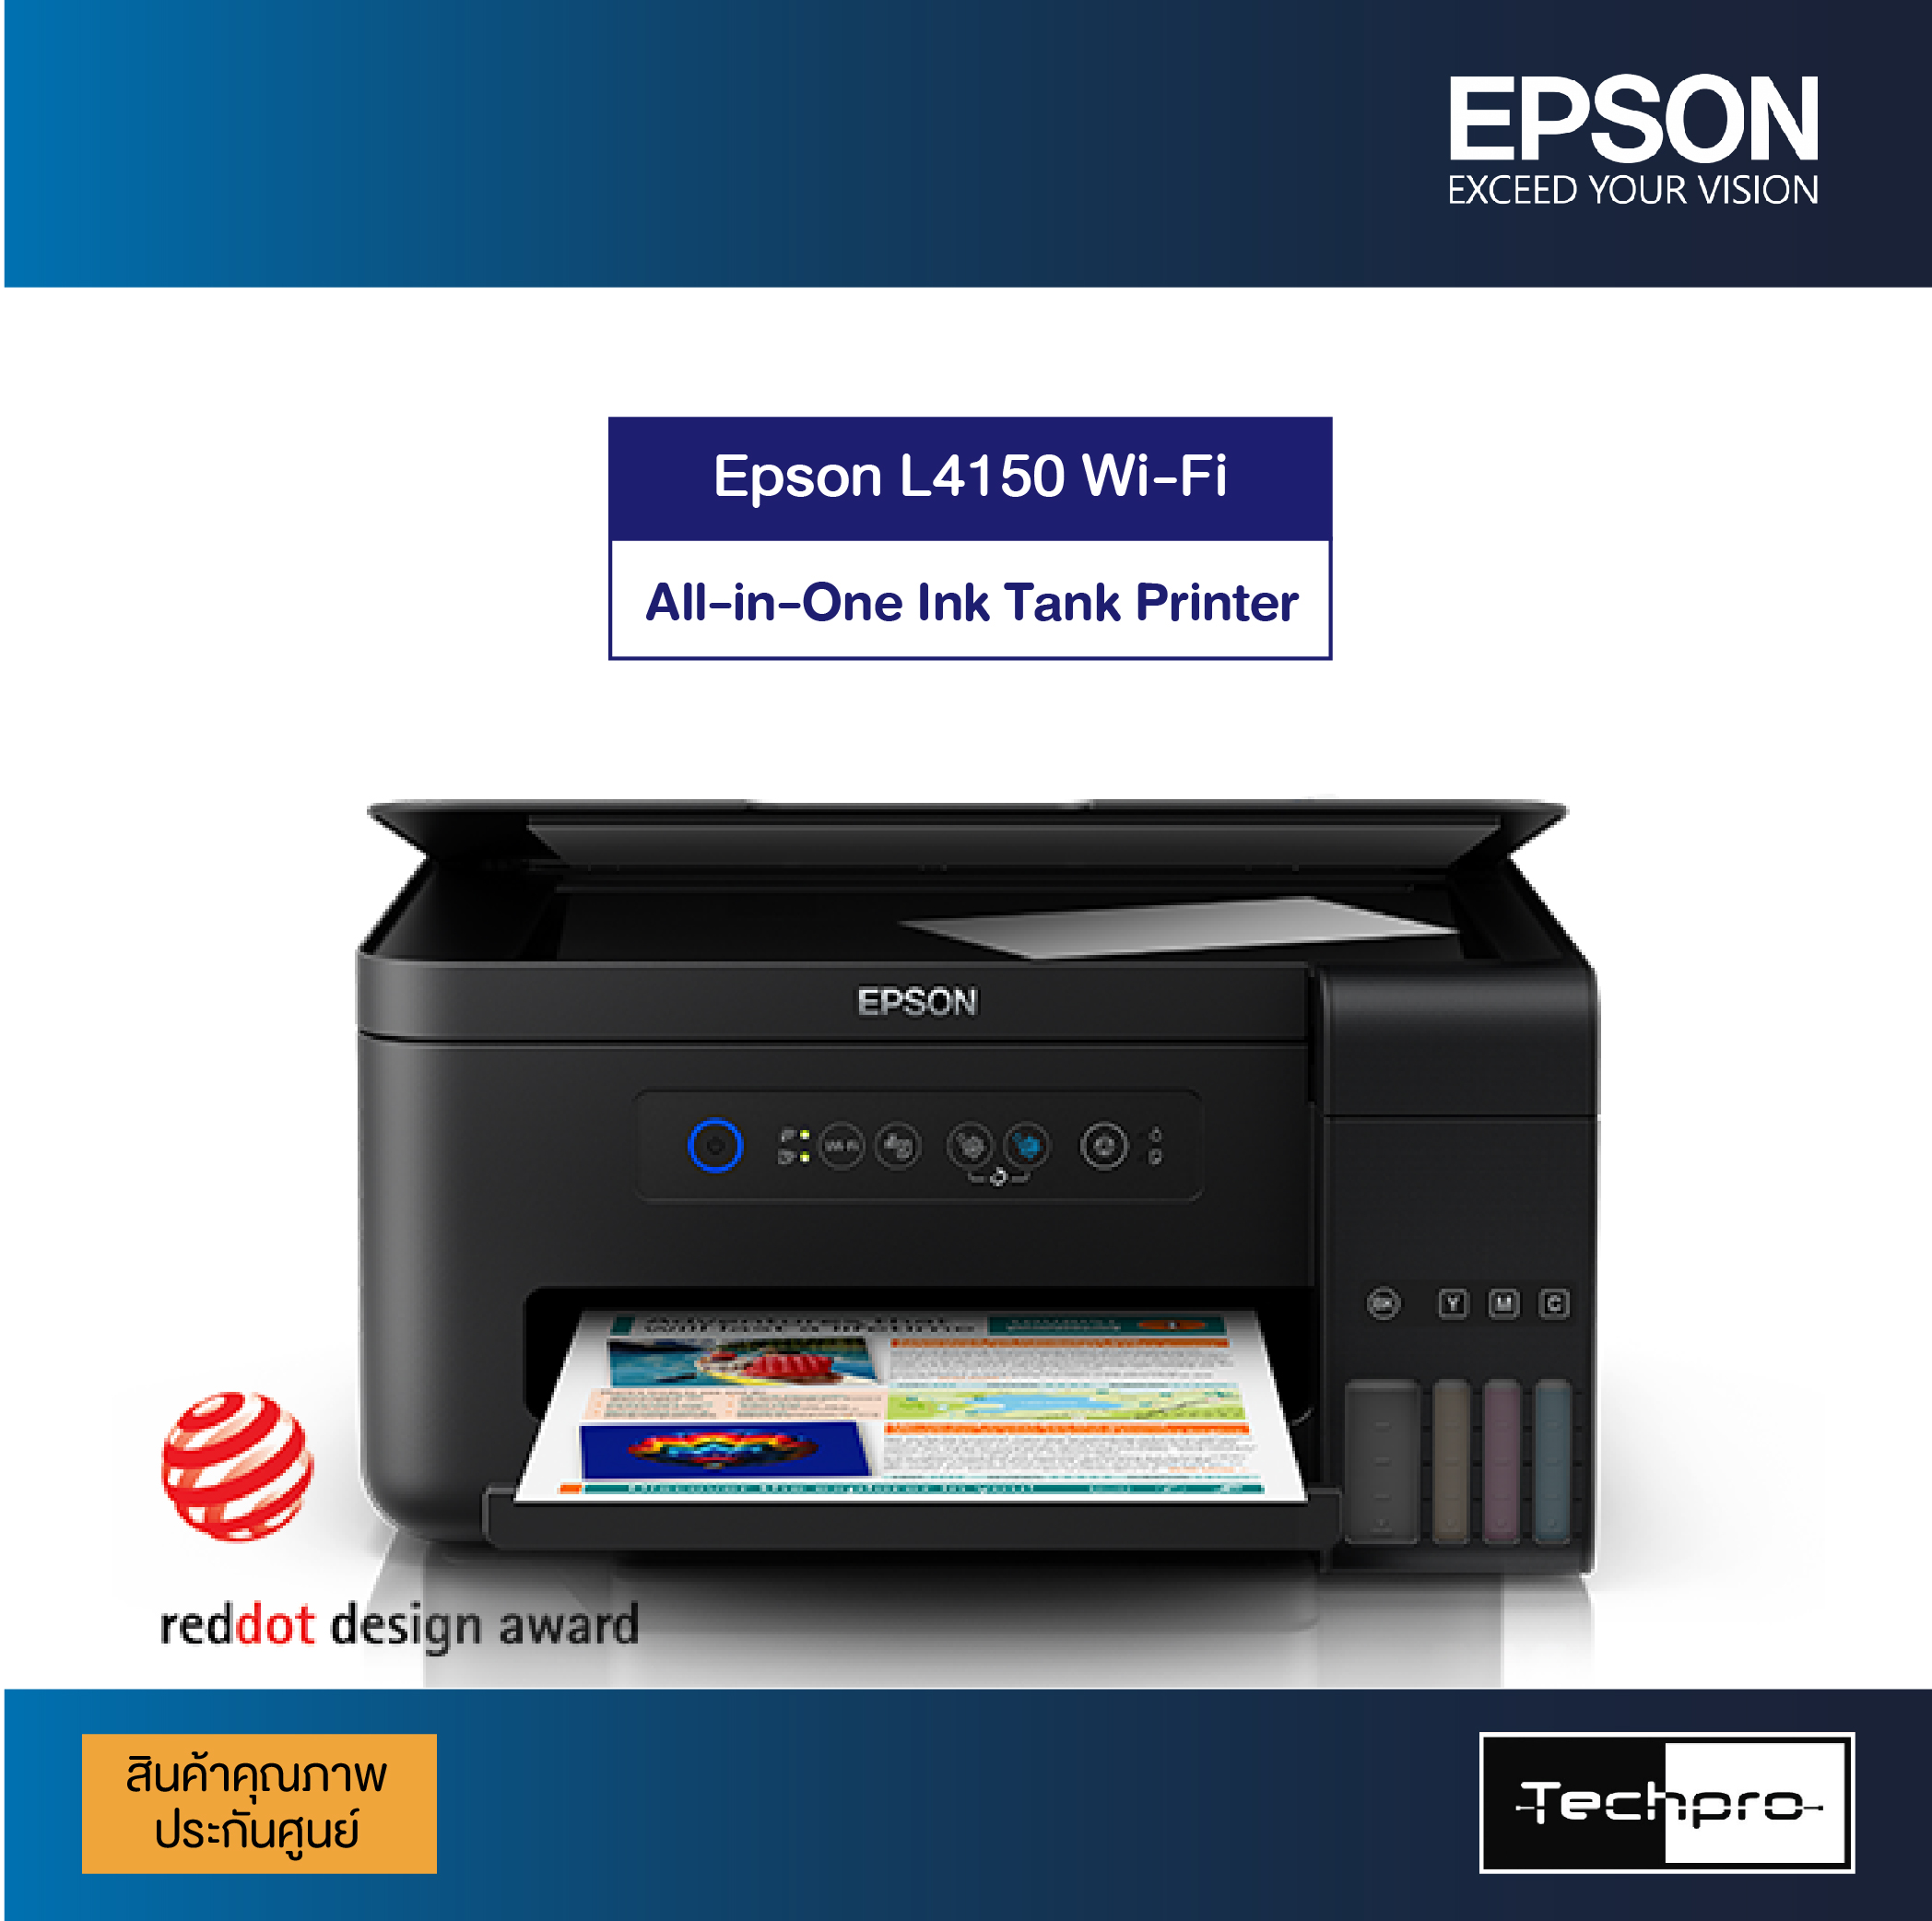 Epson L4150 Wi Fi All In One Ink Tank Printer Techpro 1702